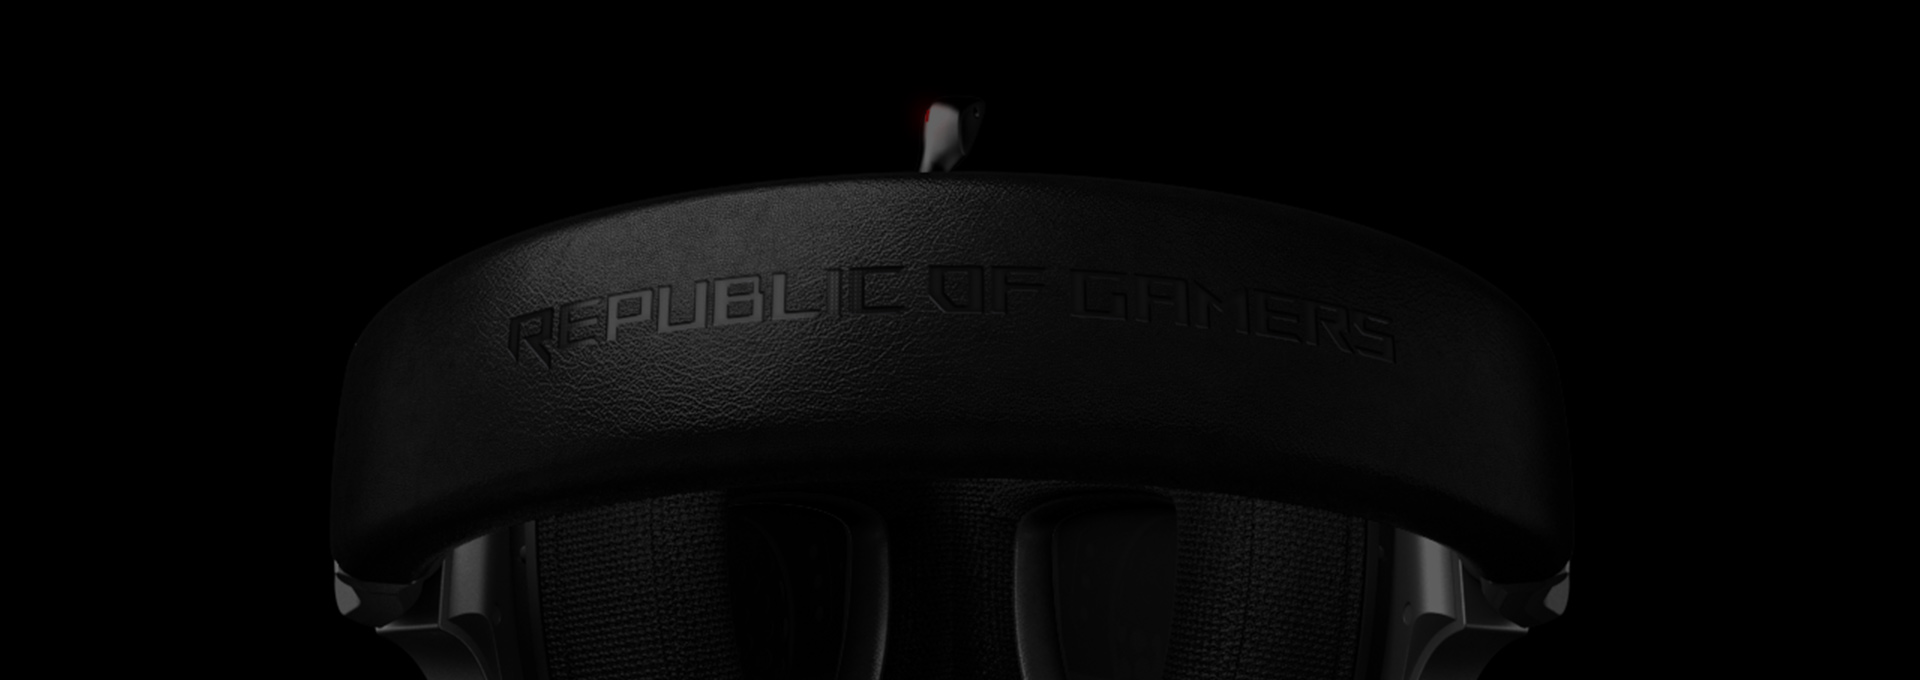 Consoles Circular RBG Lighting Effect and Mobile Gaming ASUS RGB Gaming Headset ROG Delta Gaming Headphones with Detachable Mic Hi-Res ESS Quad-DAC USB-C Connector for PCs